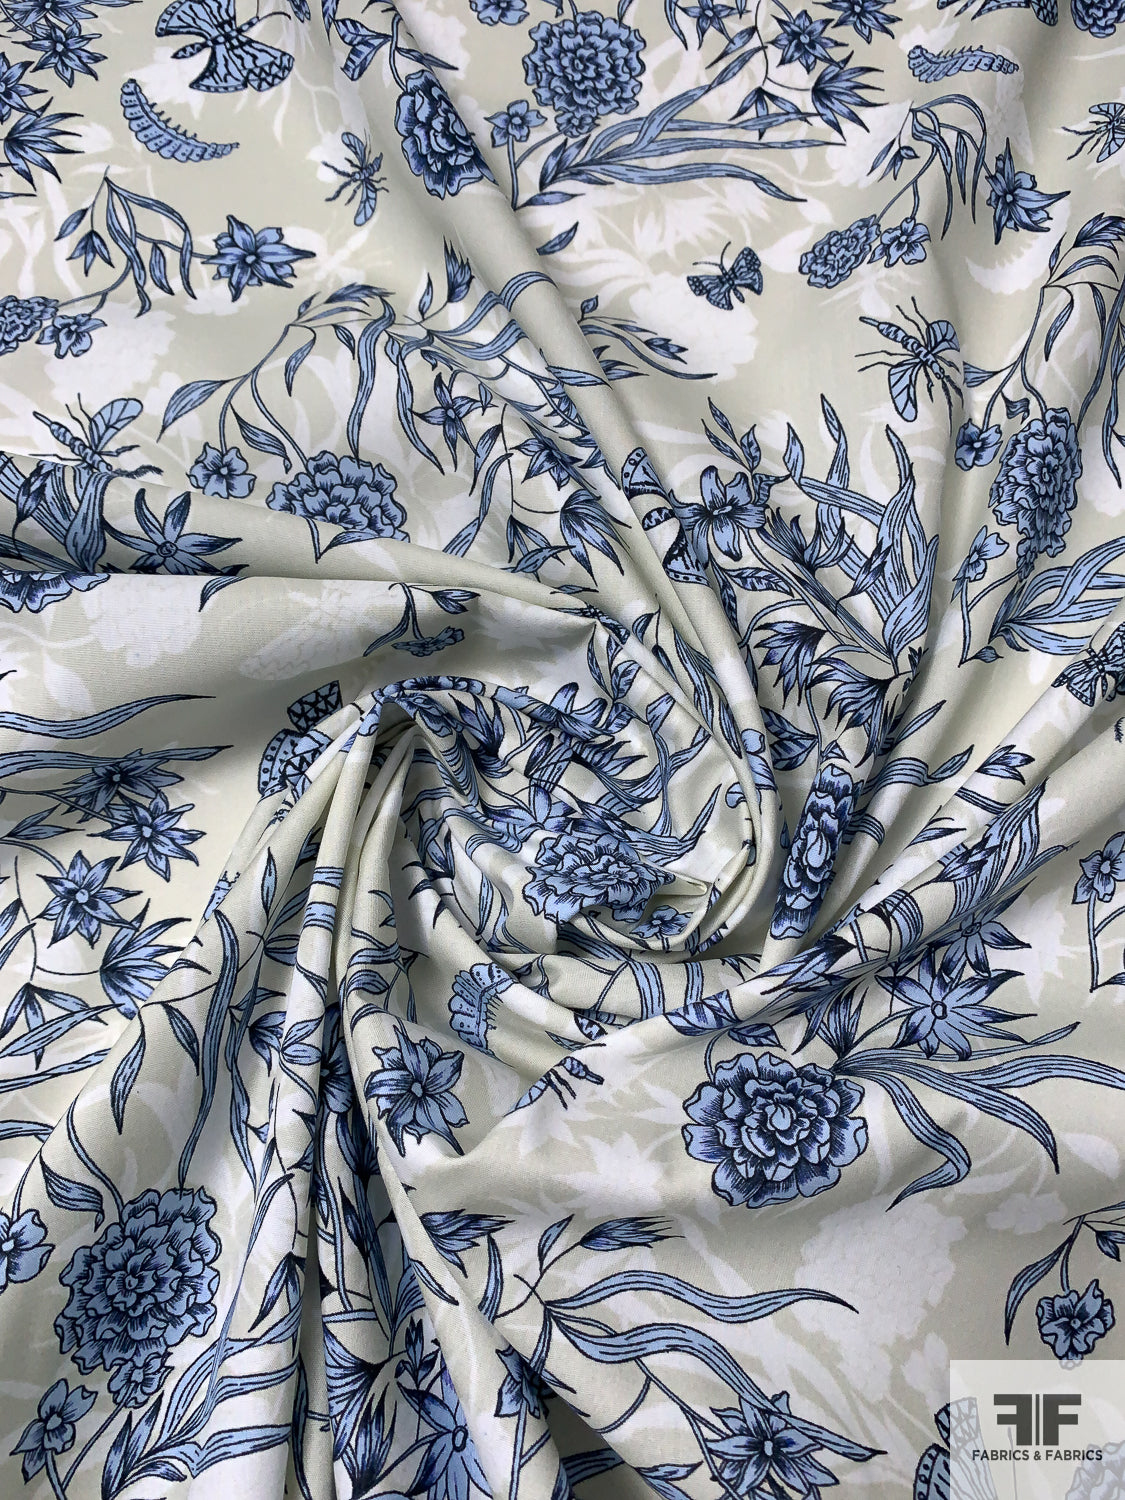 Italian Floral Printed Cotton Lawn - Pale Powder Grey / Blue / Off-White -  Fabric by the Yard